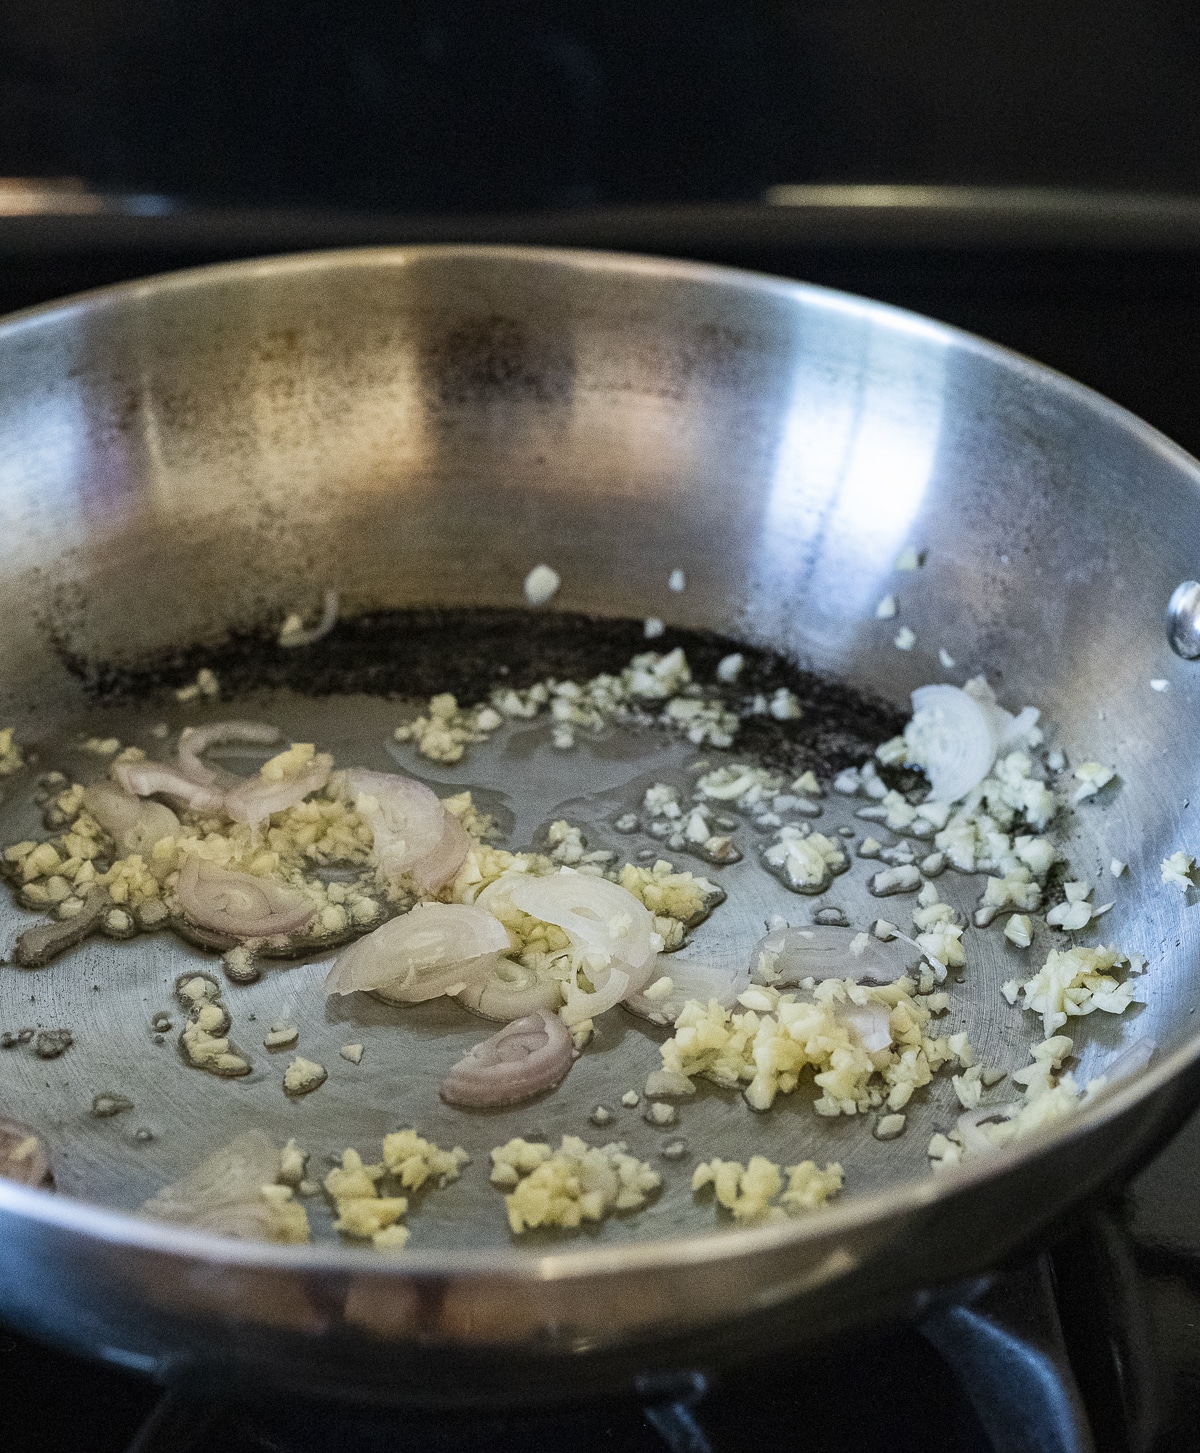 Minced garlic and chopped shallot being cooked in a wok.